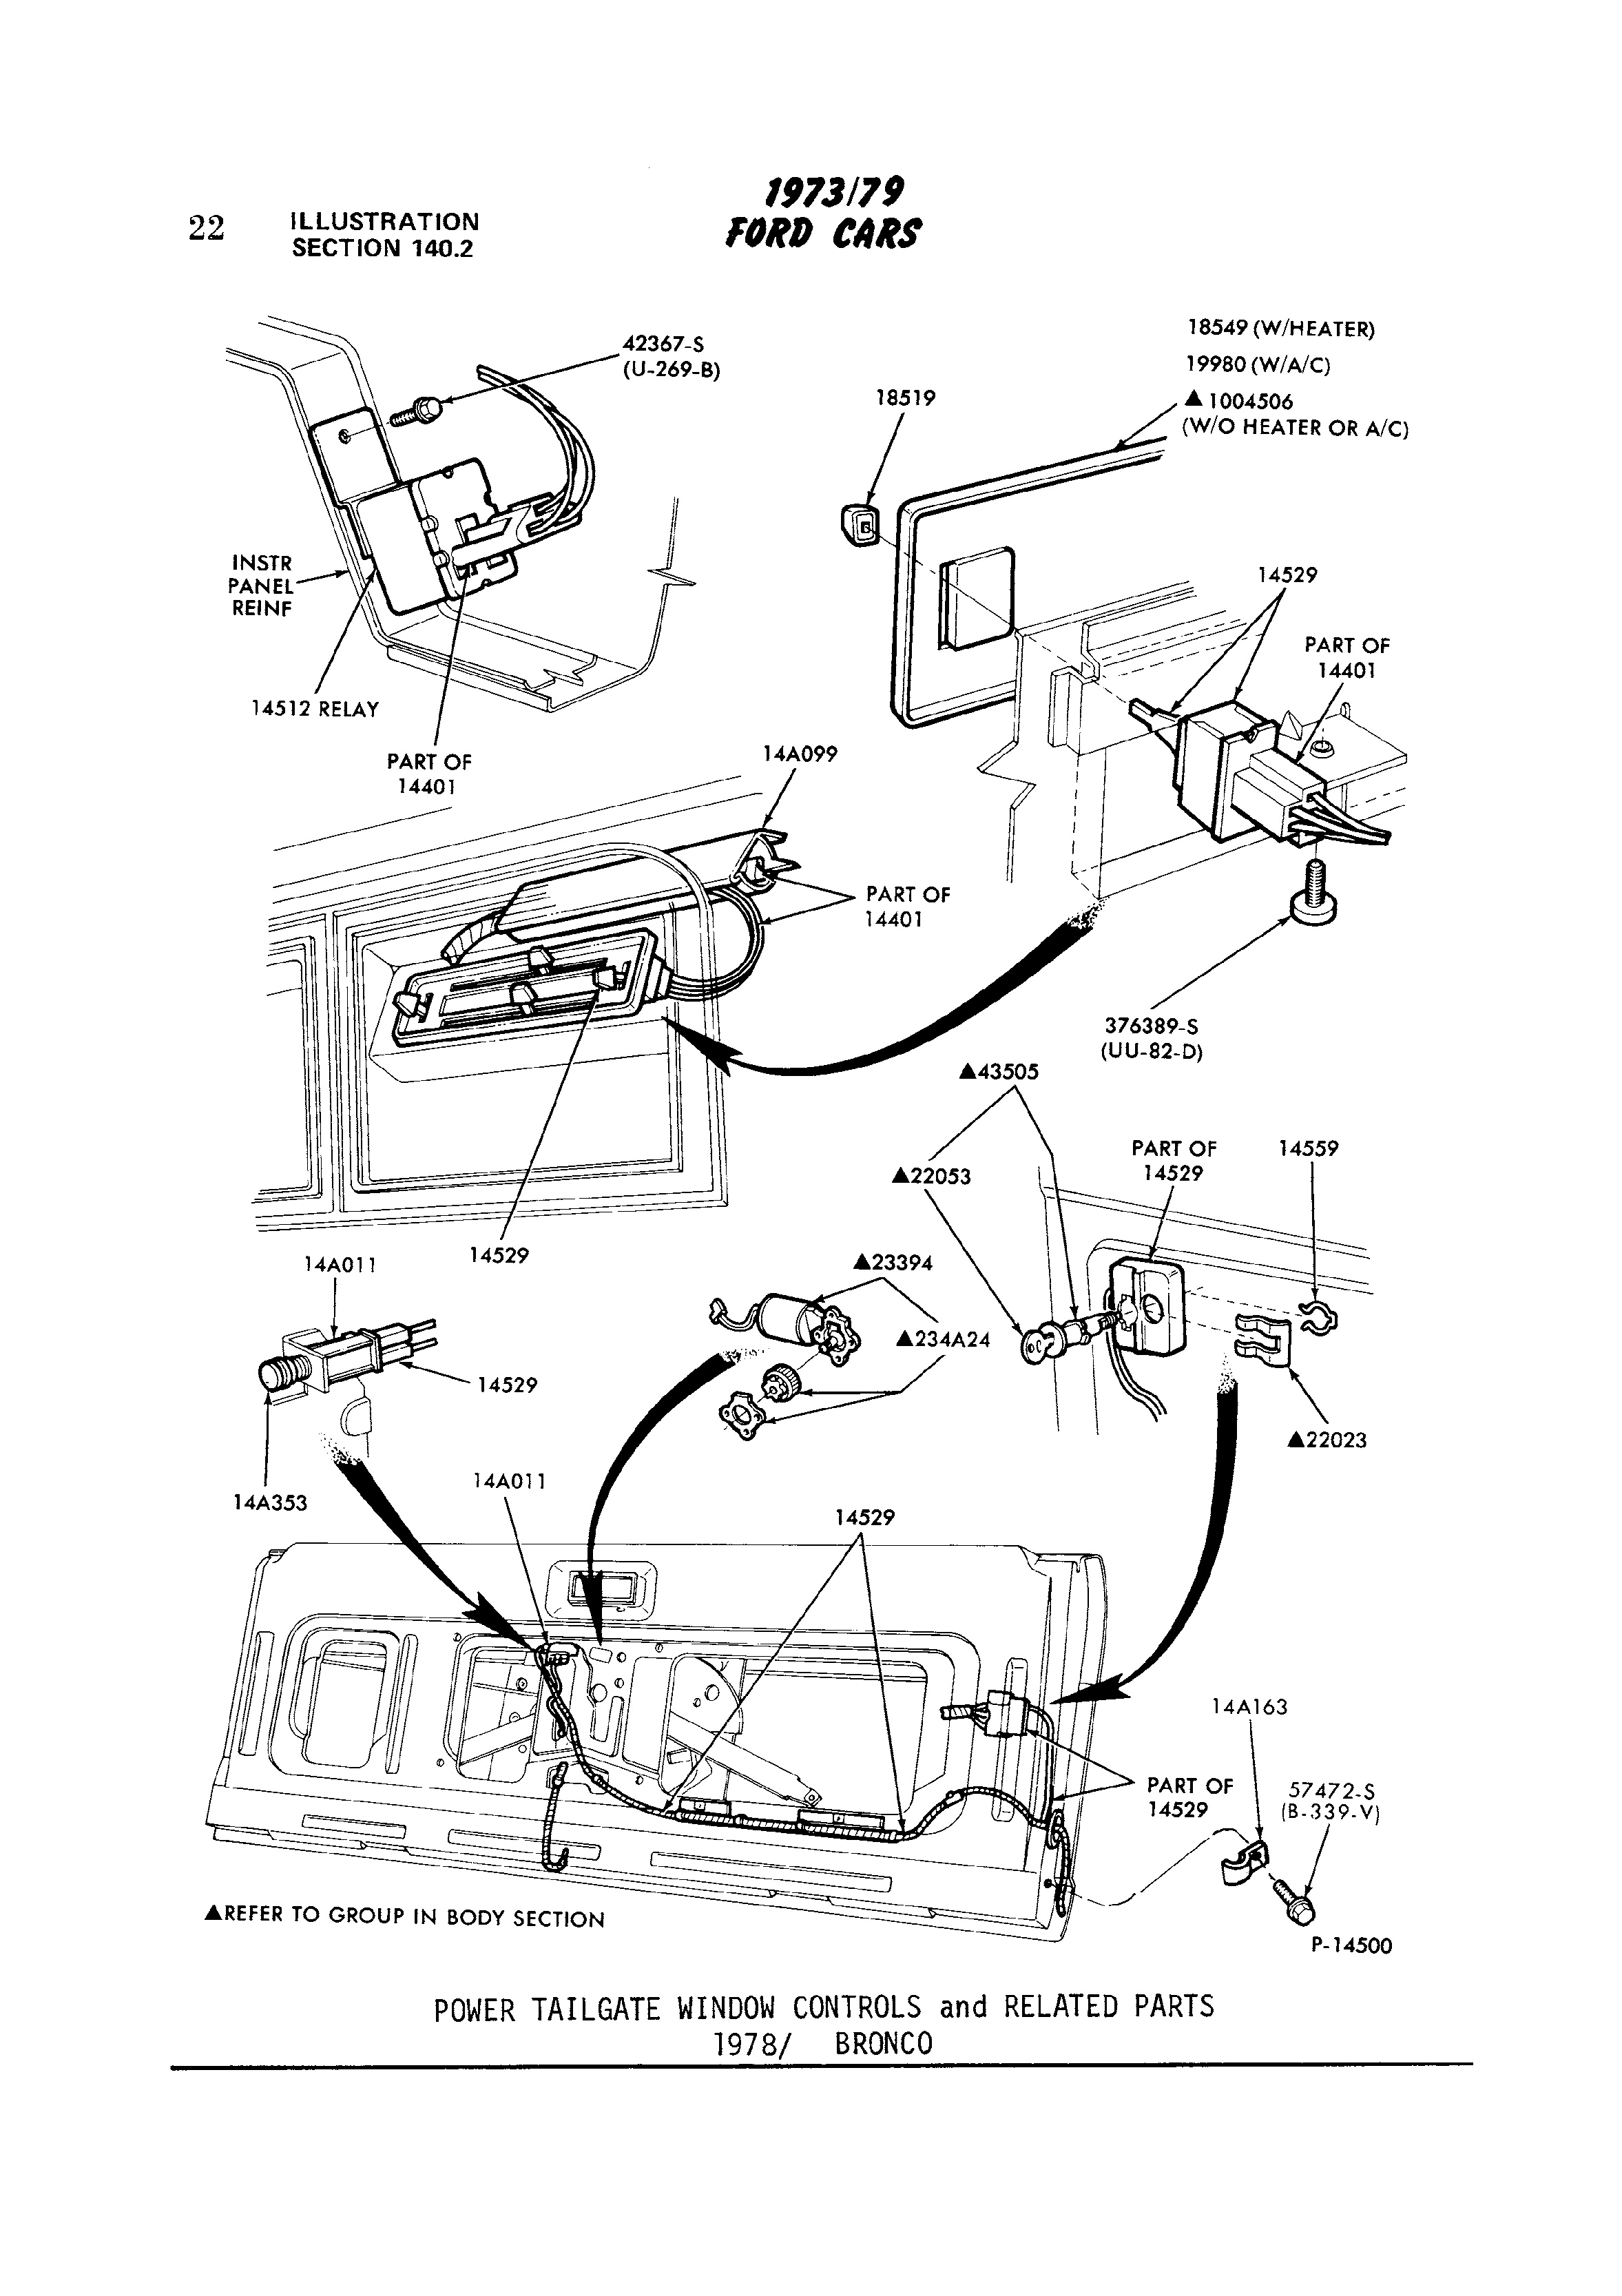 Tailgate Window Lift Key Switch Bypass? - Ford Truck Enthusiasts Forums